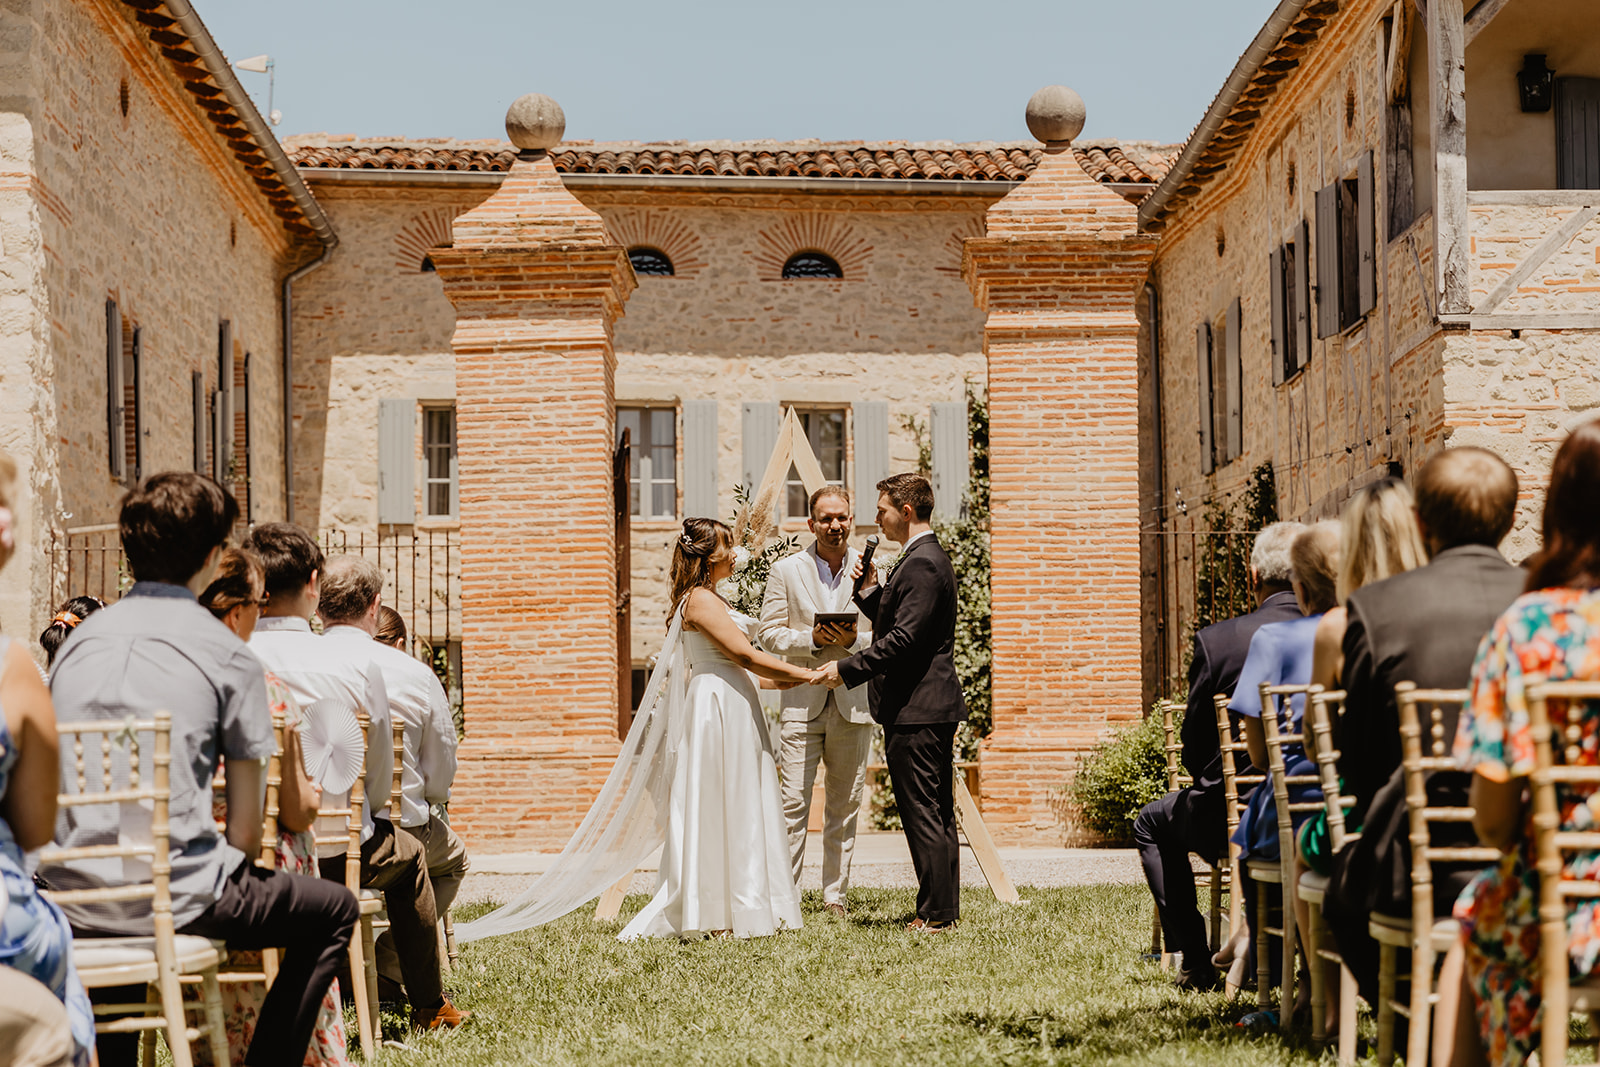 Bride and Groom at a France Destination Wedding. Photography and Videography by Olive Joy Photography